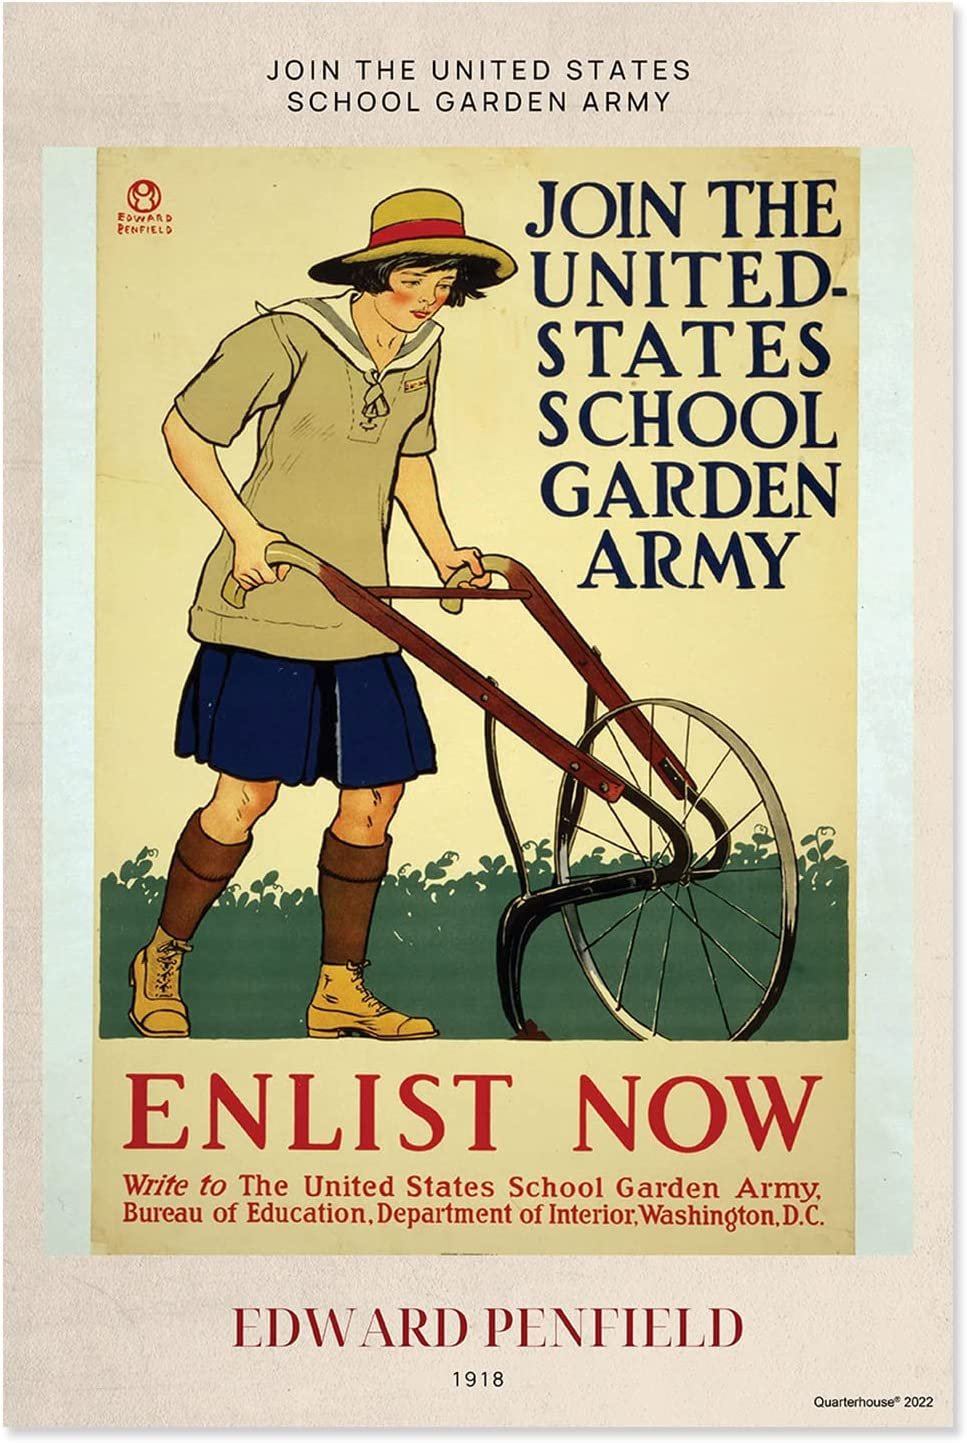 Quarterhouse WWI Posters Poster Set, Social Studies Classroom Learning Materials for K-12 Students and Teachers, Set of 8, 12 x 18 Inches, Extra Durable